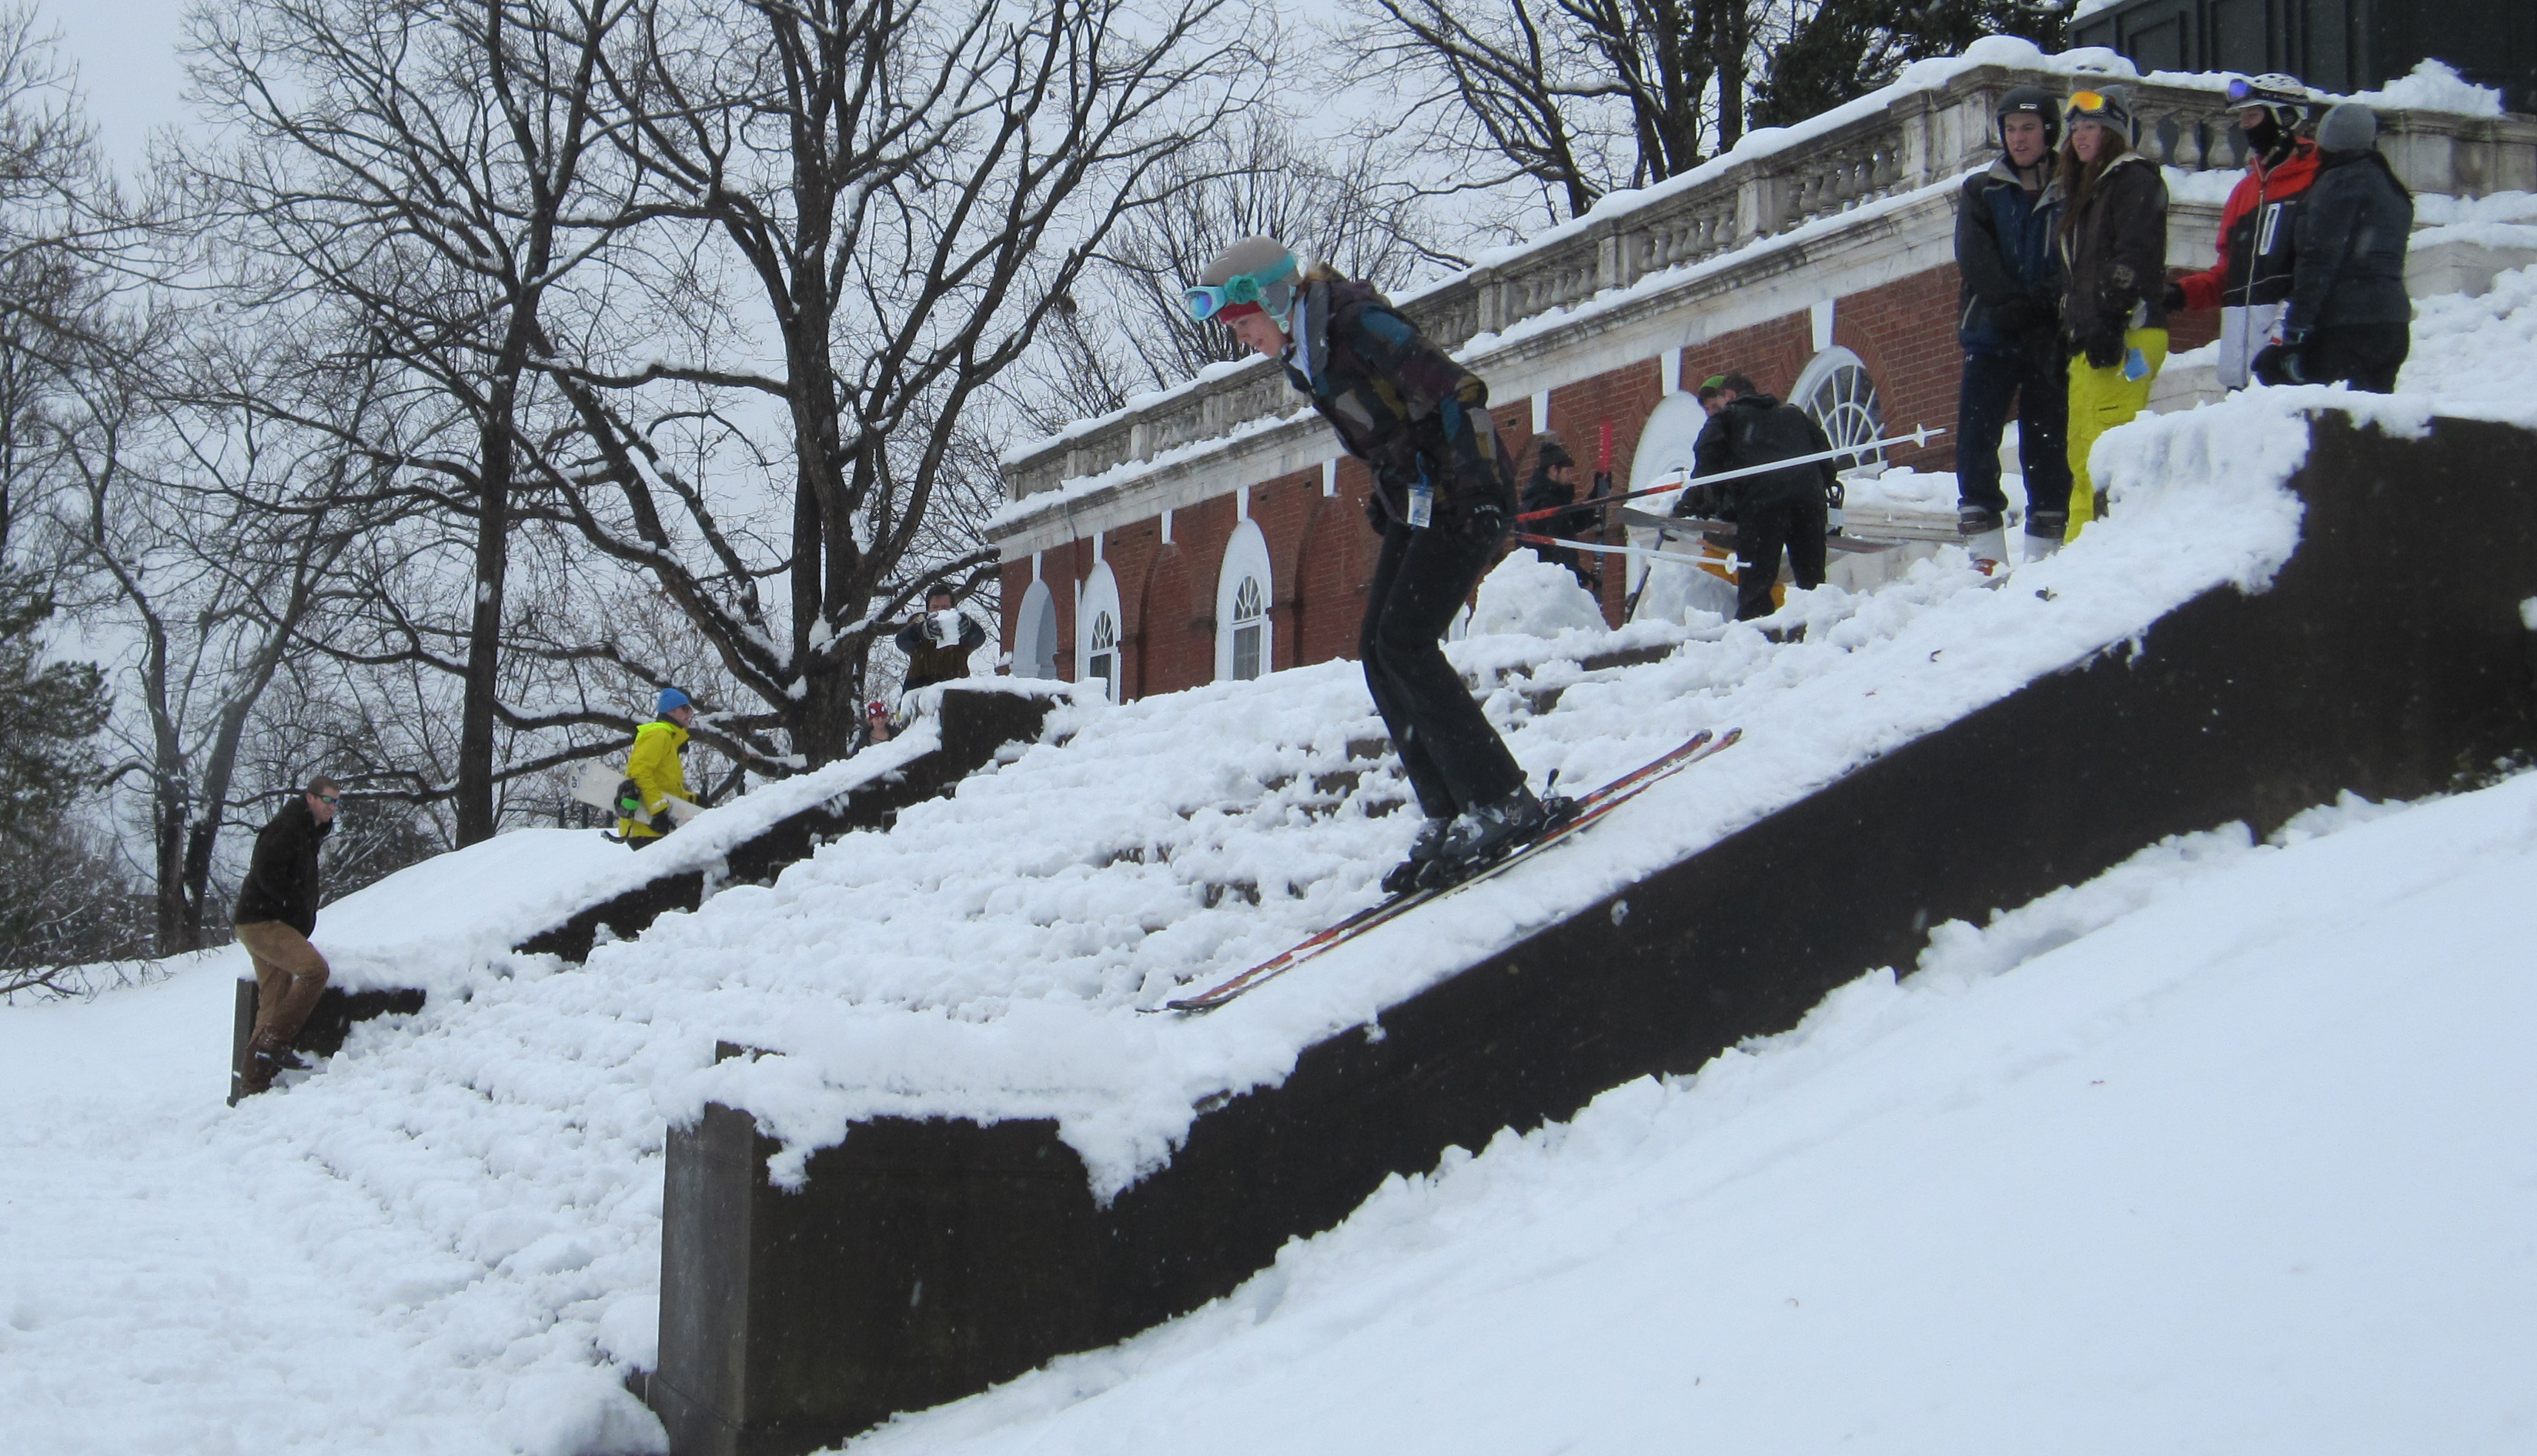 Students skiing down steps on grounds